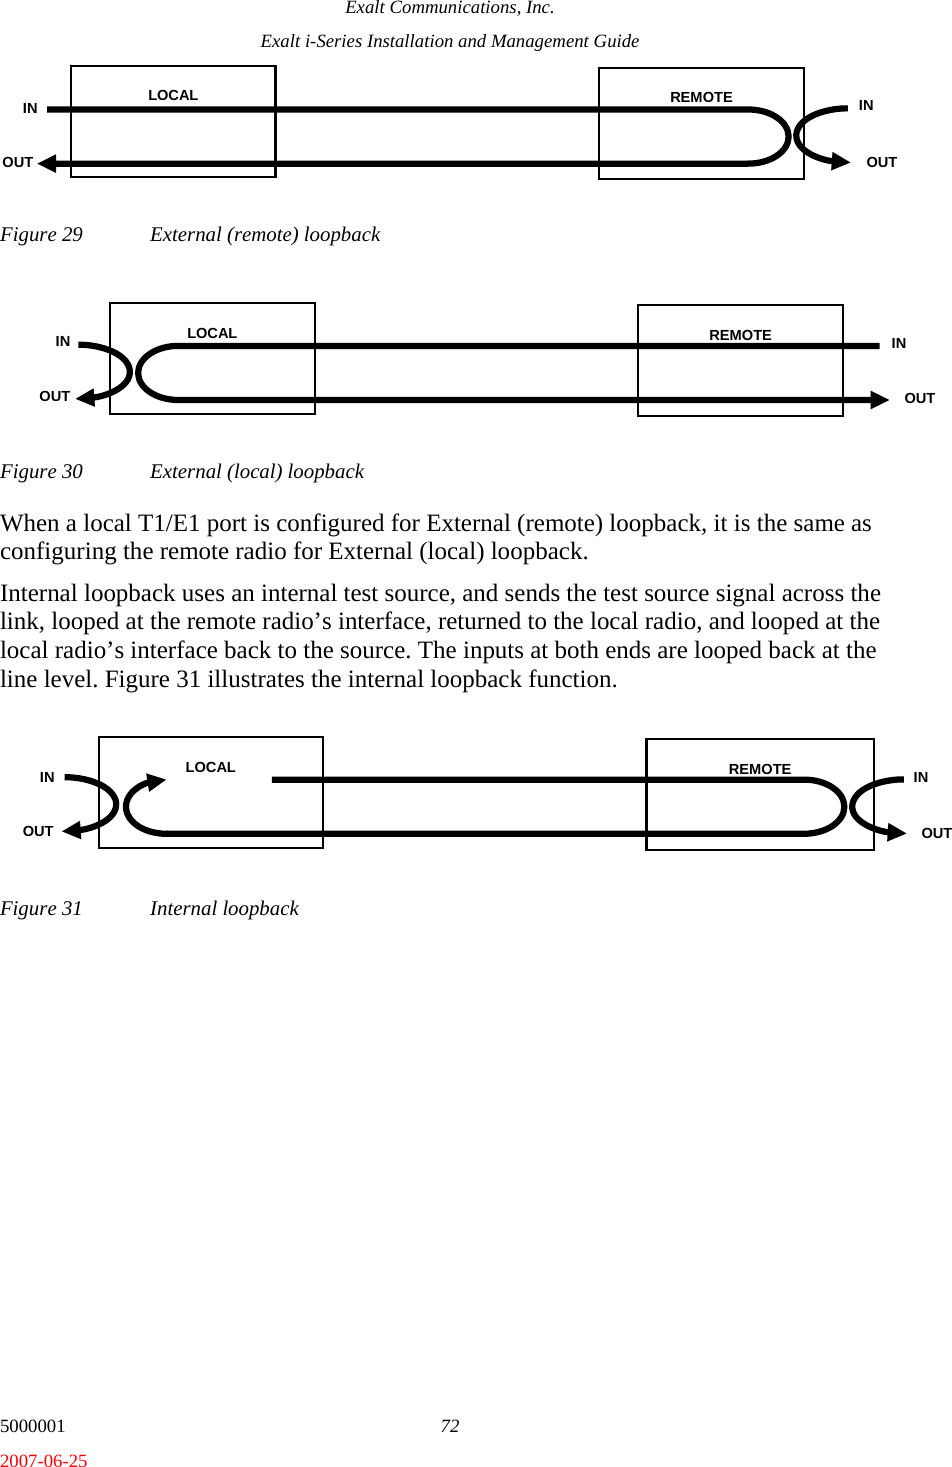 Exalt Communications, Inc. Exalt i-Series Installation and Management Guide 5000001  72 2007-06-25 Figure 29  External (remote) loopback Figure 30  External (local) loopback When a local T1/E1 port is configured for External (remote) loopback, it is the same as configuring the remote radio for External (local) loopback. Internal loopback uses an internal test source, and sends the test source signal across the link, looped at the remote radio’s interface, returned to the local radio, and looped at the local radio’s interface back to the source. The inputs at both ends are looped back at the line level. Figure 31 illustrates the internal loopback function. Figure 31  Internal loopback LOCAL  REMOTE IN OUT  OUT IN LOCAL  REMOTE IN OUT  OUT IN LOCAL  REMOTE IN OUT  OUT IN 